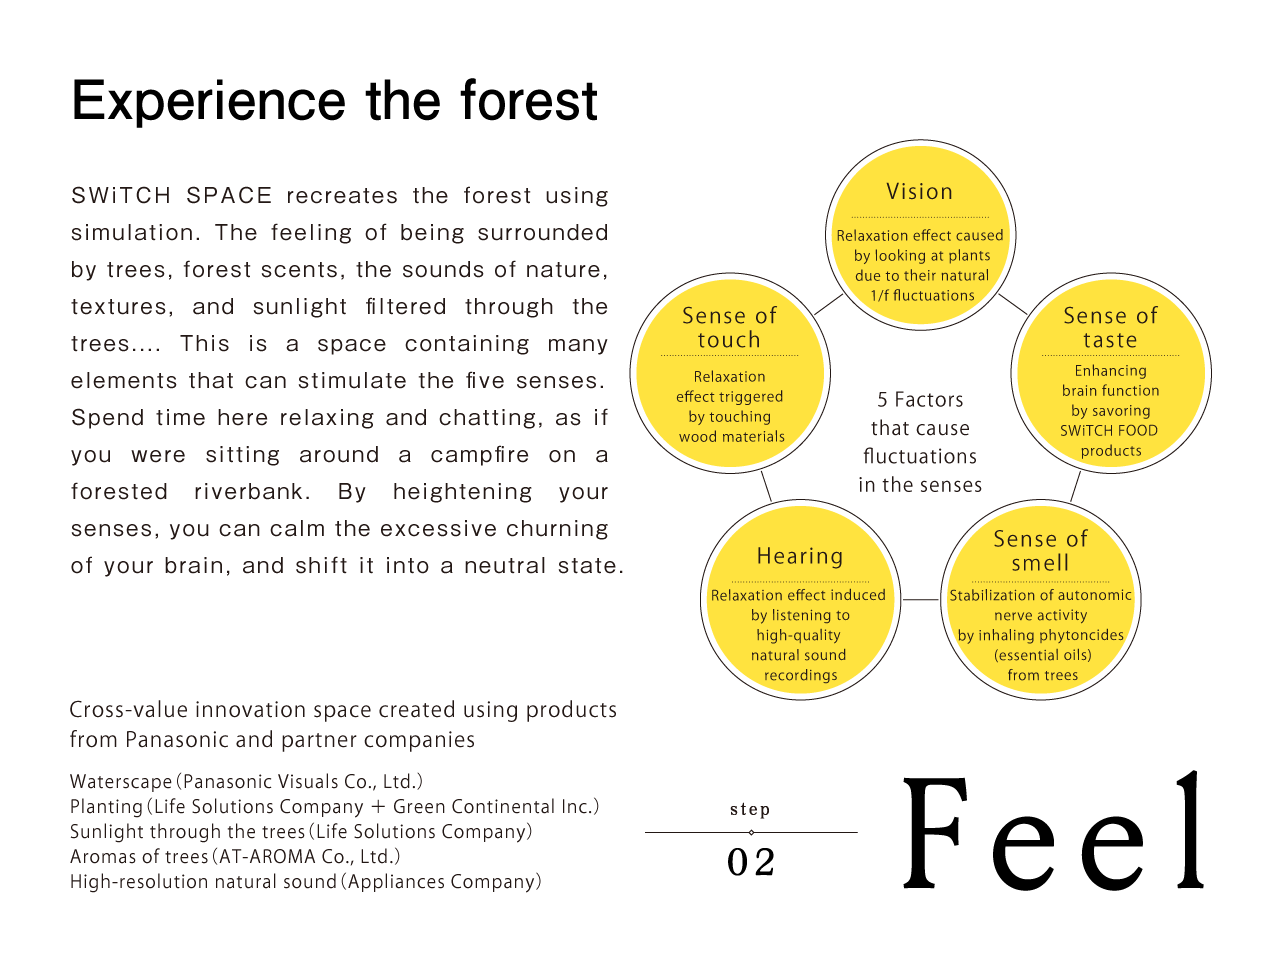 Step 2: Feel | Experience the forest | SWiTCH SPACE recreates the forest using simulation. The feeling of being surrounded by trees, forest scents, the sounds of nature, textures, and sunlight filtered through the trees.... This is a space containing many elements that can stimulate the five senses. Spend time here relaxing and chatting, as if you were sitting around a campfire on a forested riverbank. By heightening your senses, you can calm the excessive churning of your brain, and shift it into a neutral state.